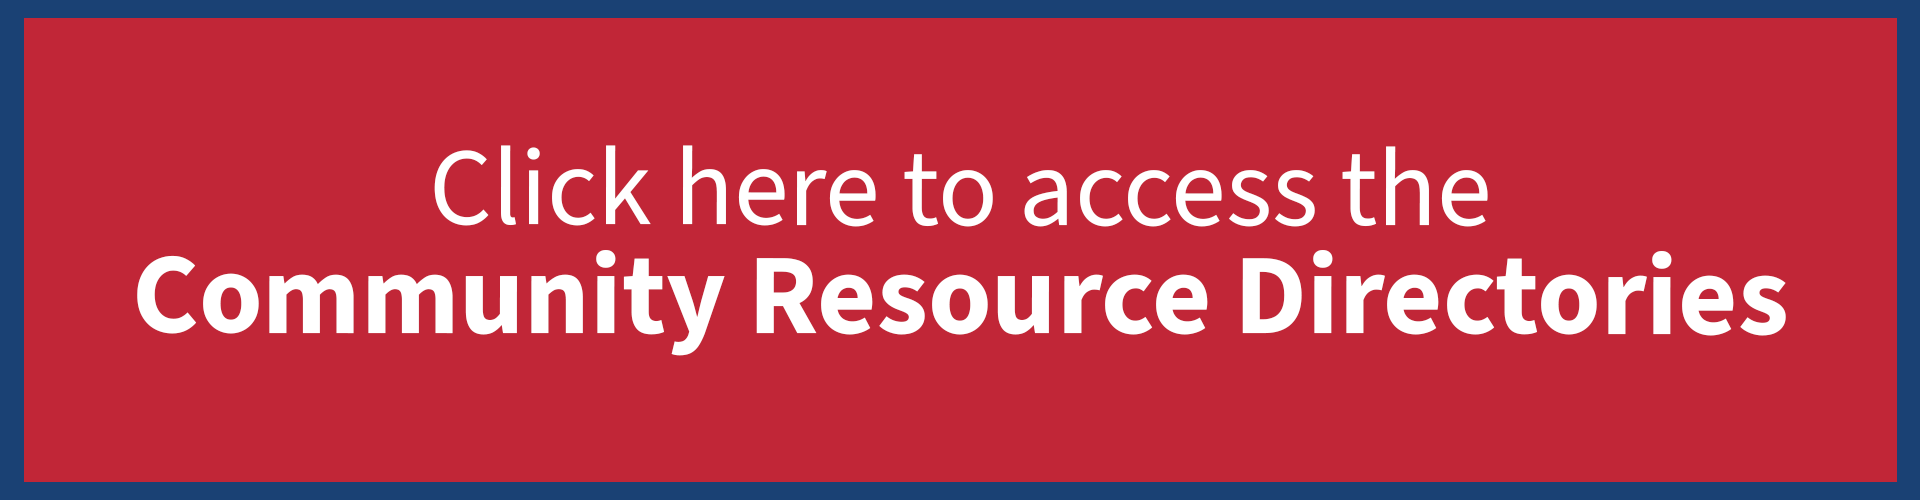 Access the Community Resource Directories